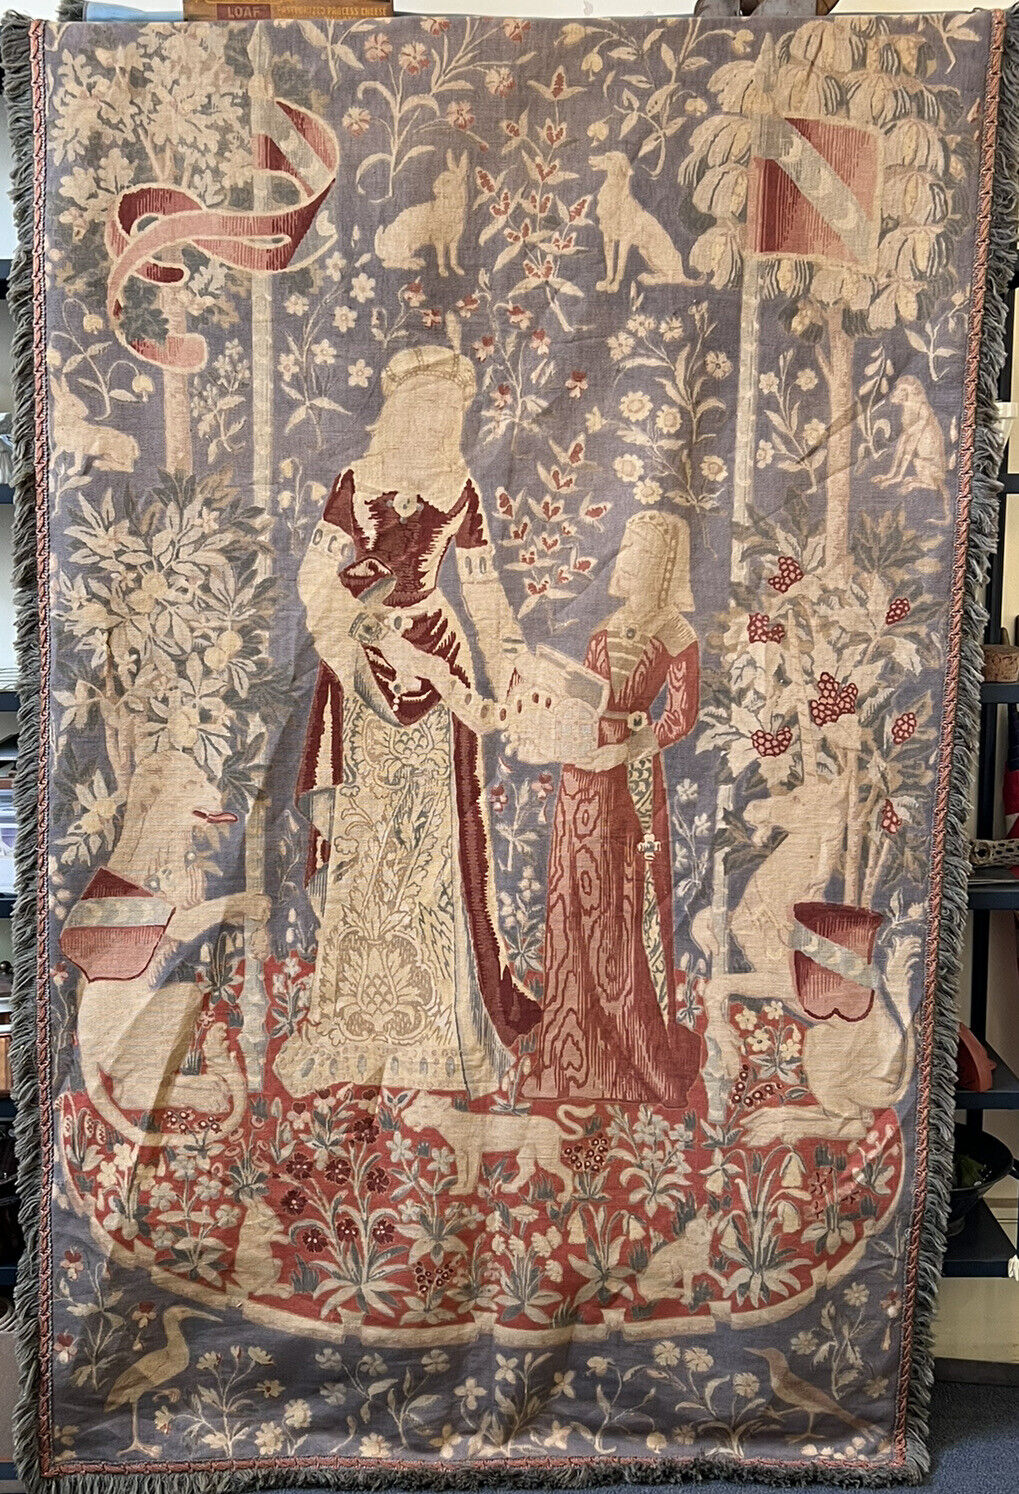 Antique French Woven Aubusson Wall Hanging Tapestry Animals & Unicorn 52” by 92”